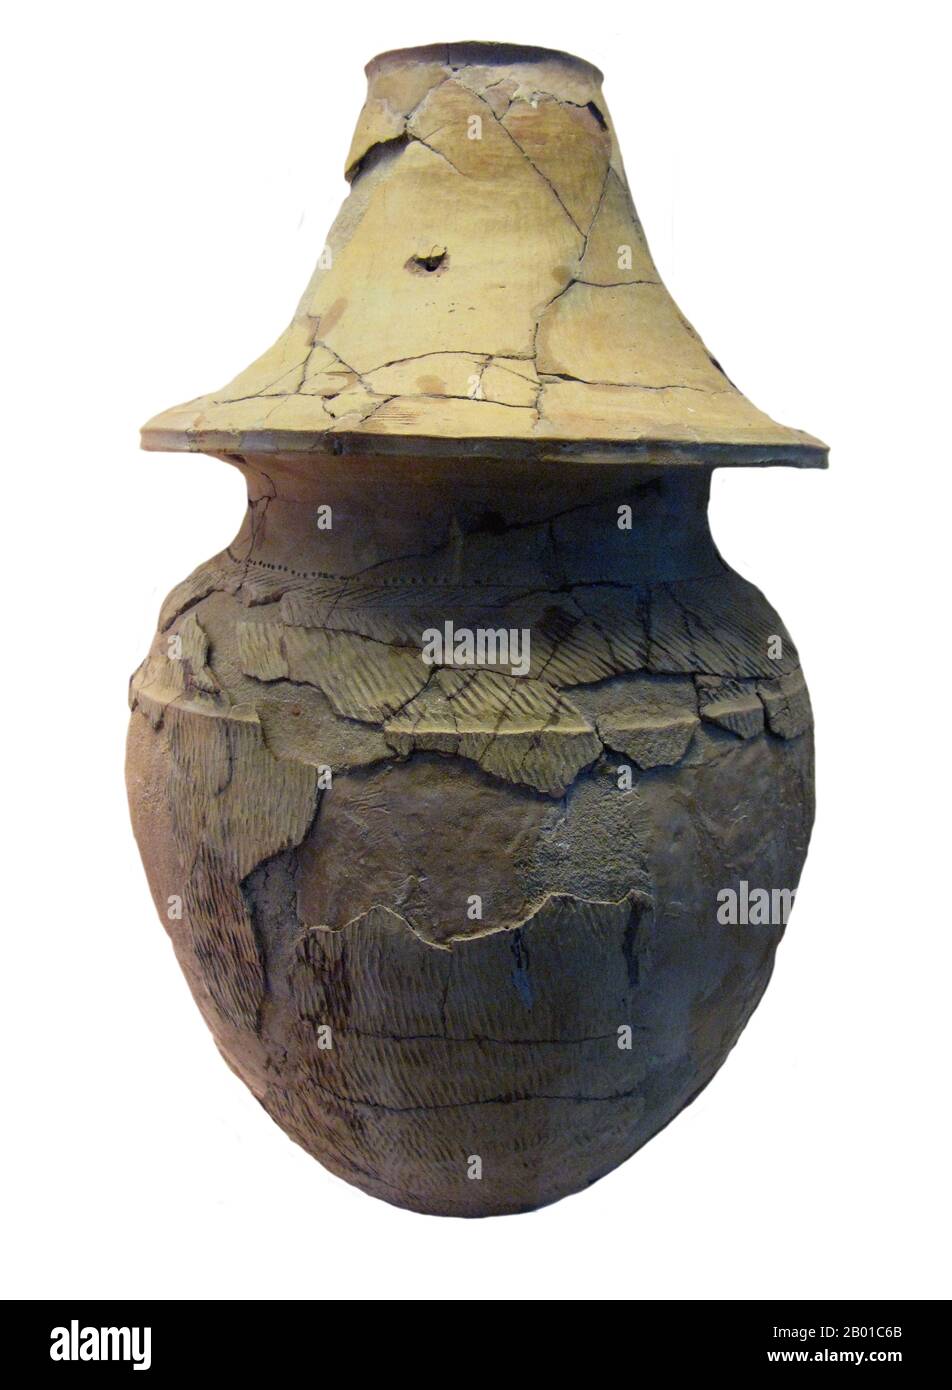 Vietnam: Pottery Burial jar, Sa Huynh Culture, c. 1000 BCE - 200 CE.  The Sa Huỳnh culture (Vietnamese: Văn hóa Sa Huỳnh) was a culture in central and southern Vietnam that flourished between c. 1000 BCE and 200 CE. Archaeological sites from the culture have been discovered from the Mekong Delta to just south of the Tonkin region. The Sa Huynh were most likely the predecessors of the Cham people, the founders of the kingdom of Champa.  The Sa Huynh culture cremated adults and buried them in jars covered with lids, a practice unique to the culture. Stock Photo